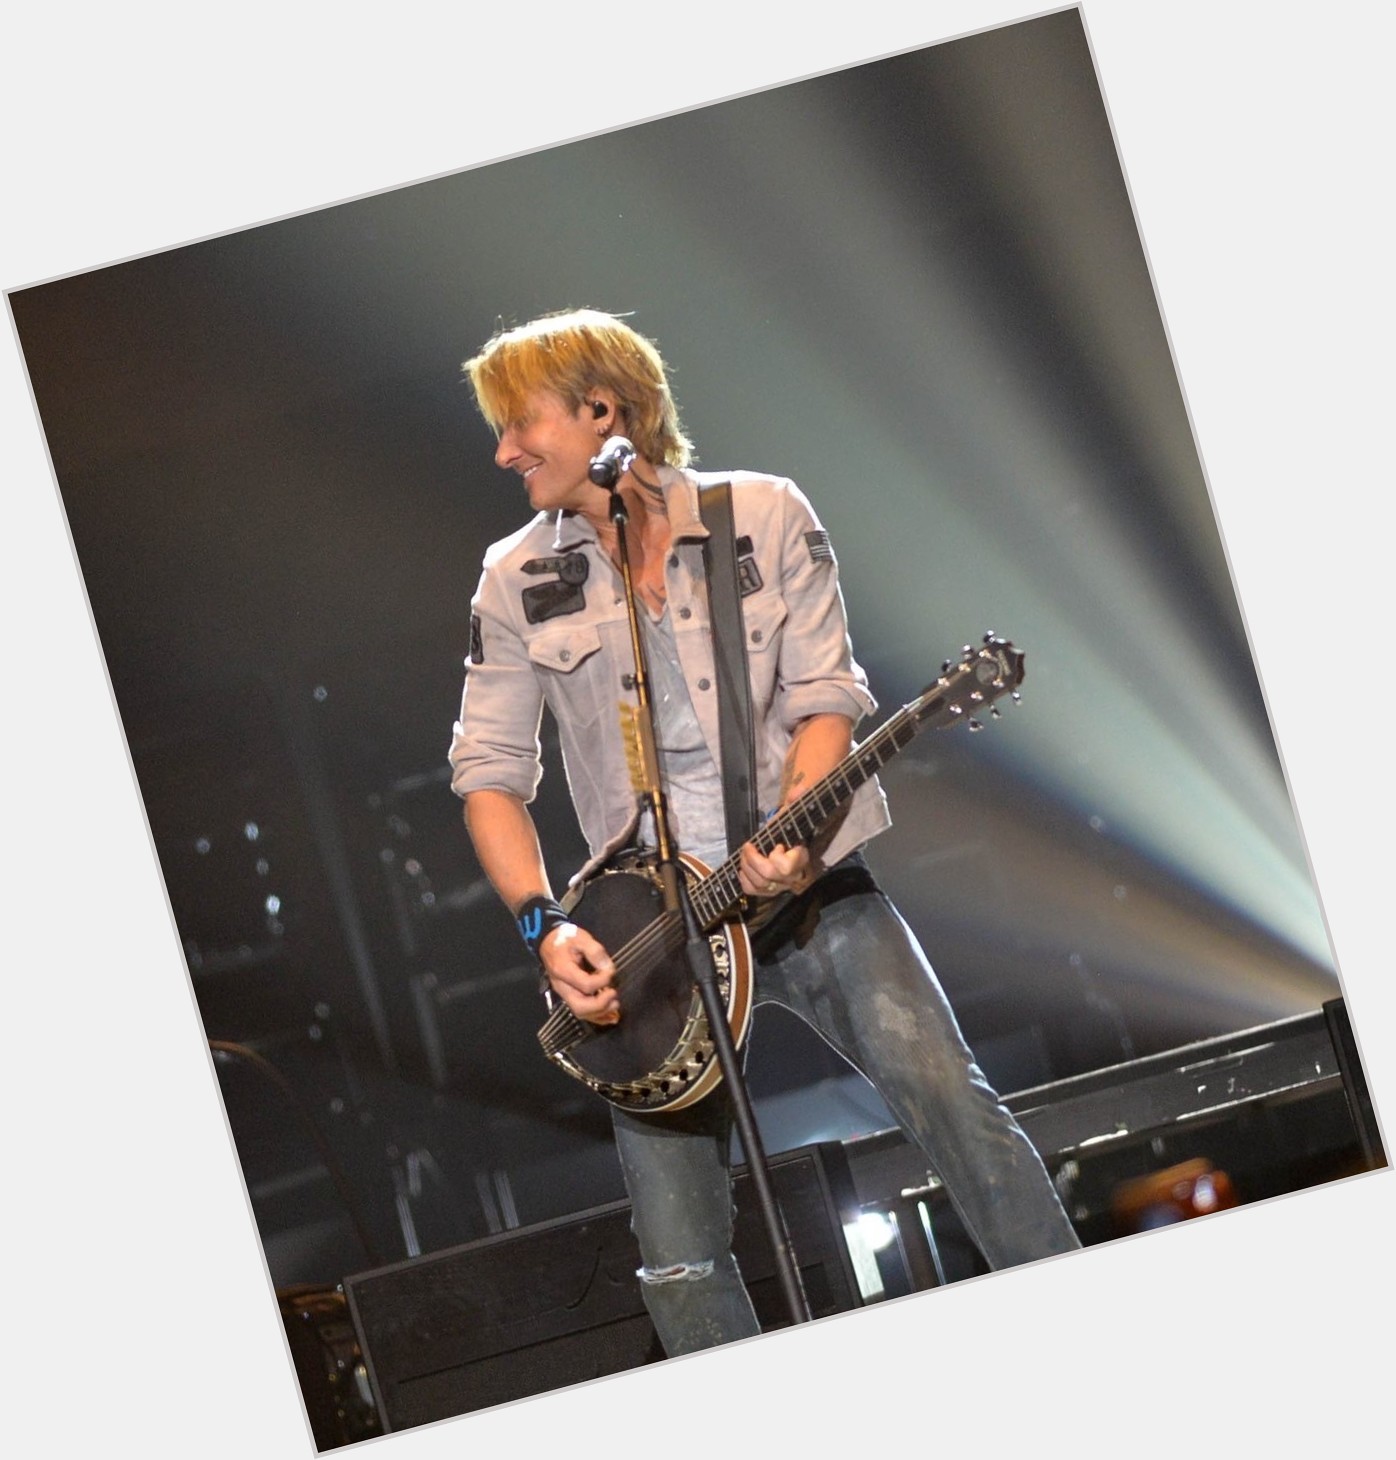 Happy Birthday !! What\s your favorite Keith Urban song? # 